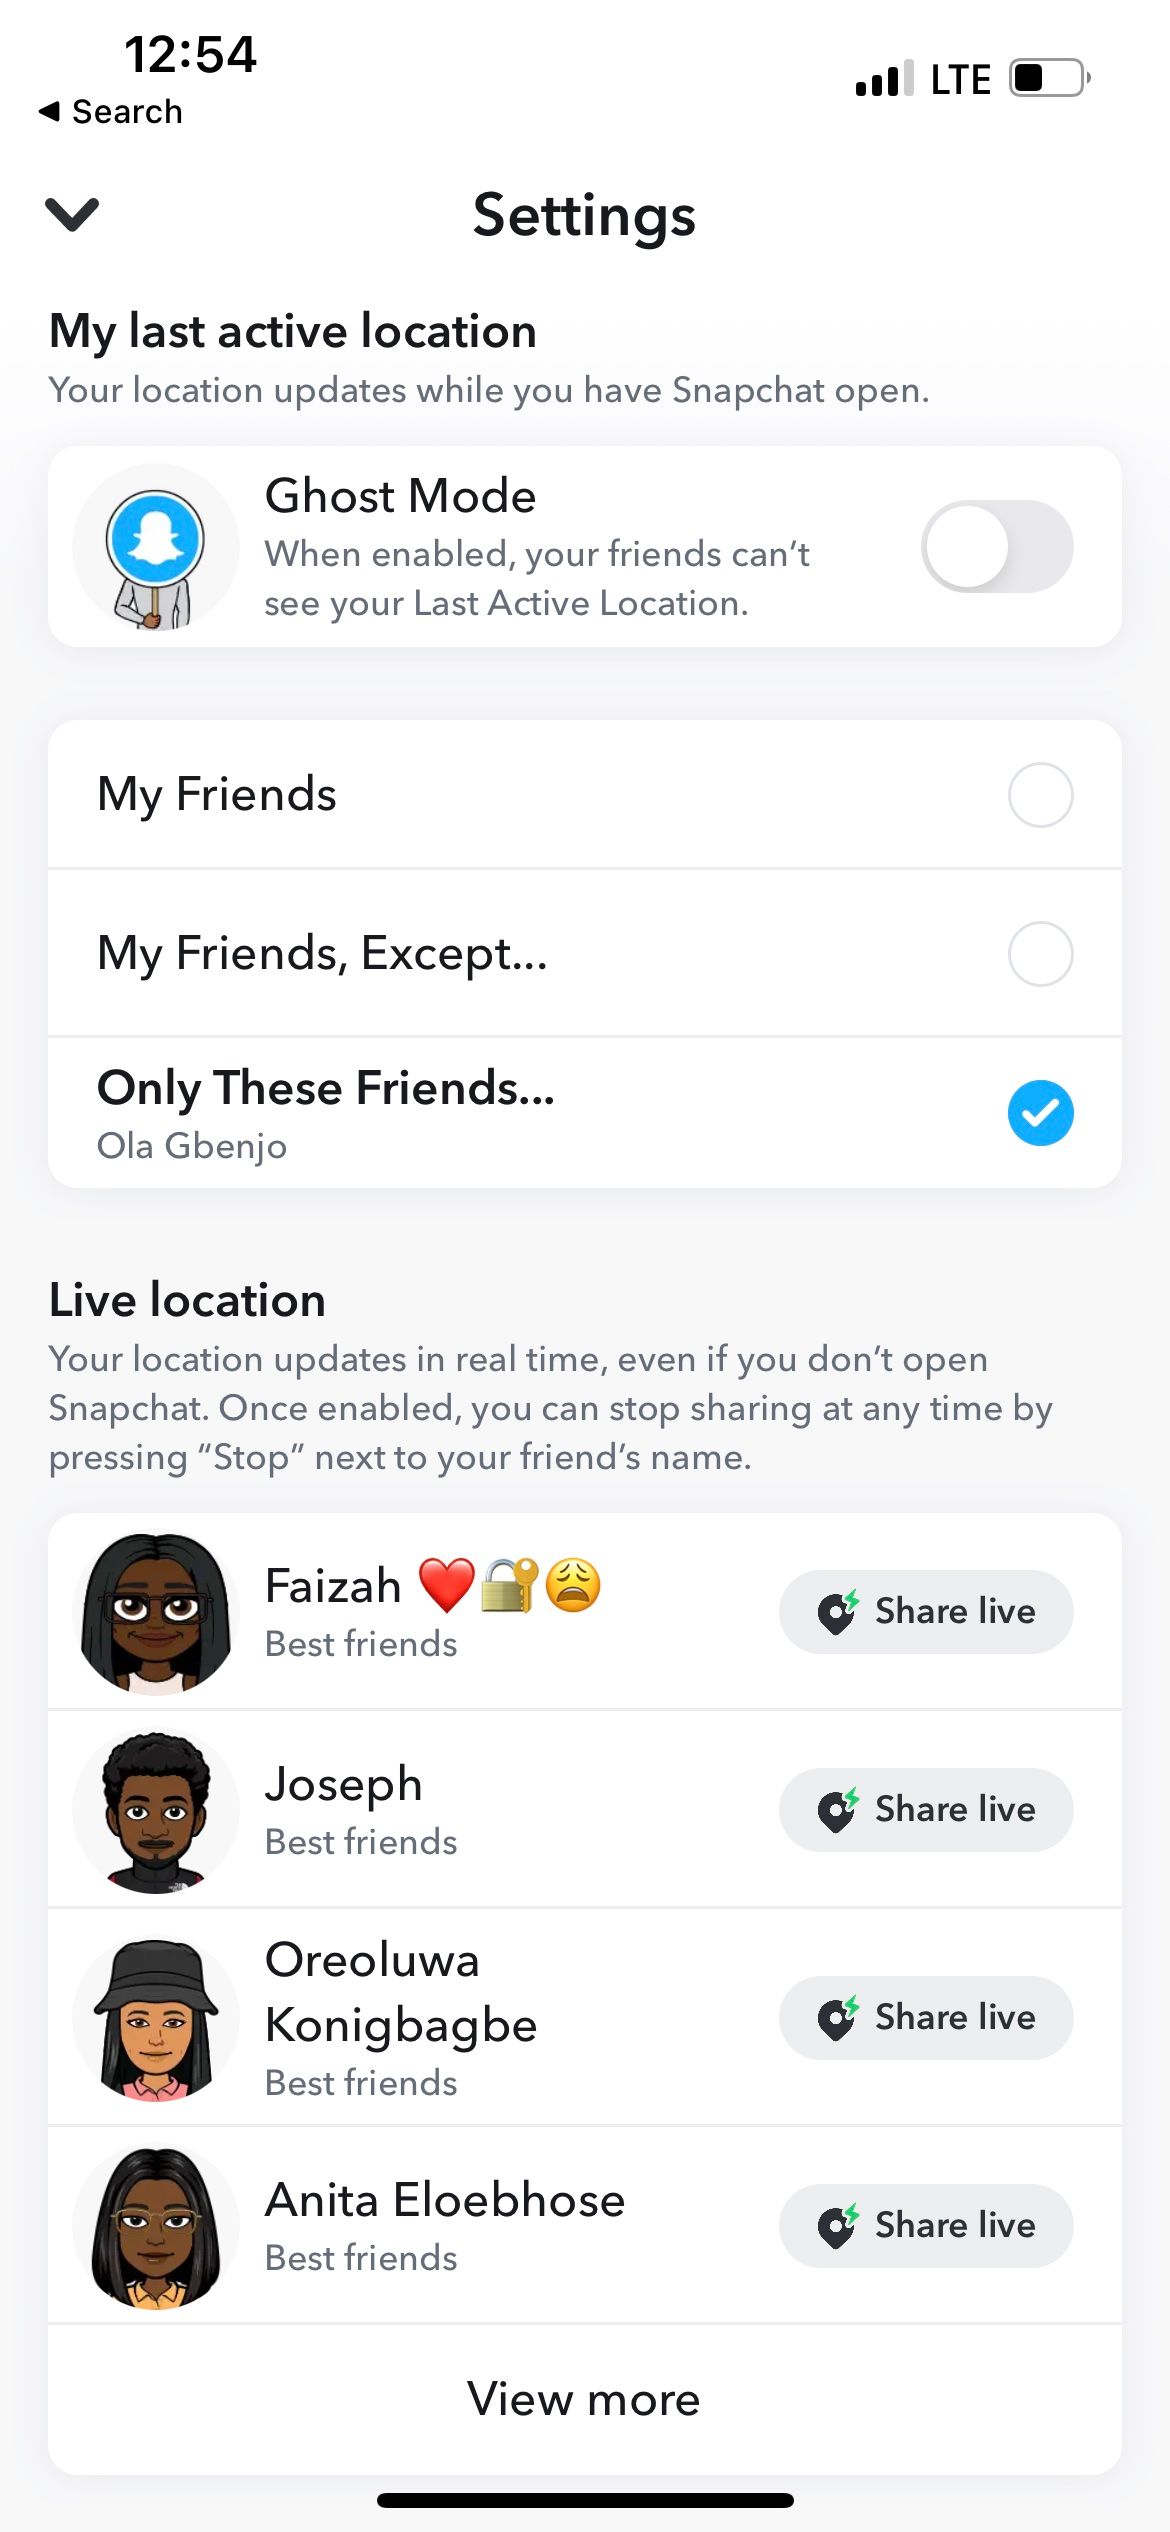 Snap Map settings on Snapchat for iOS